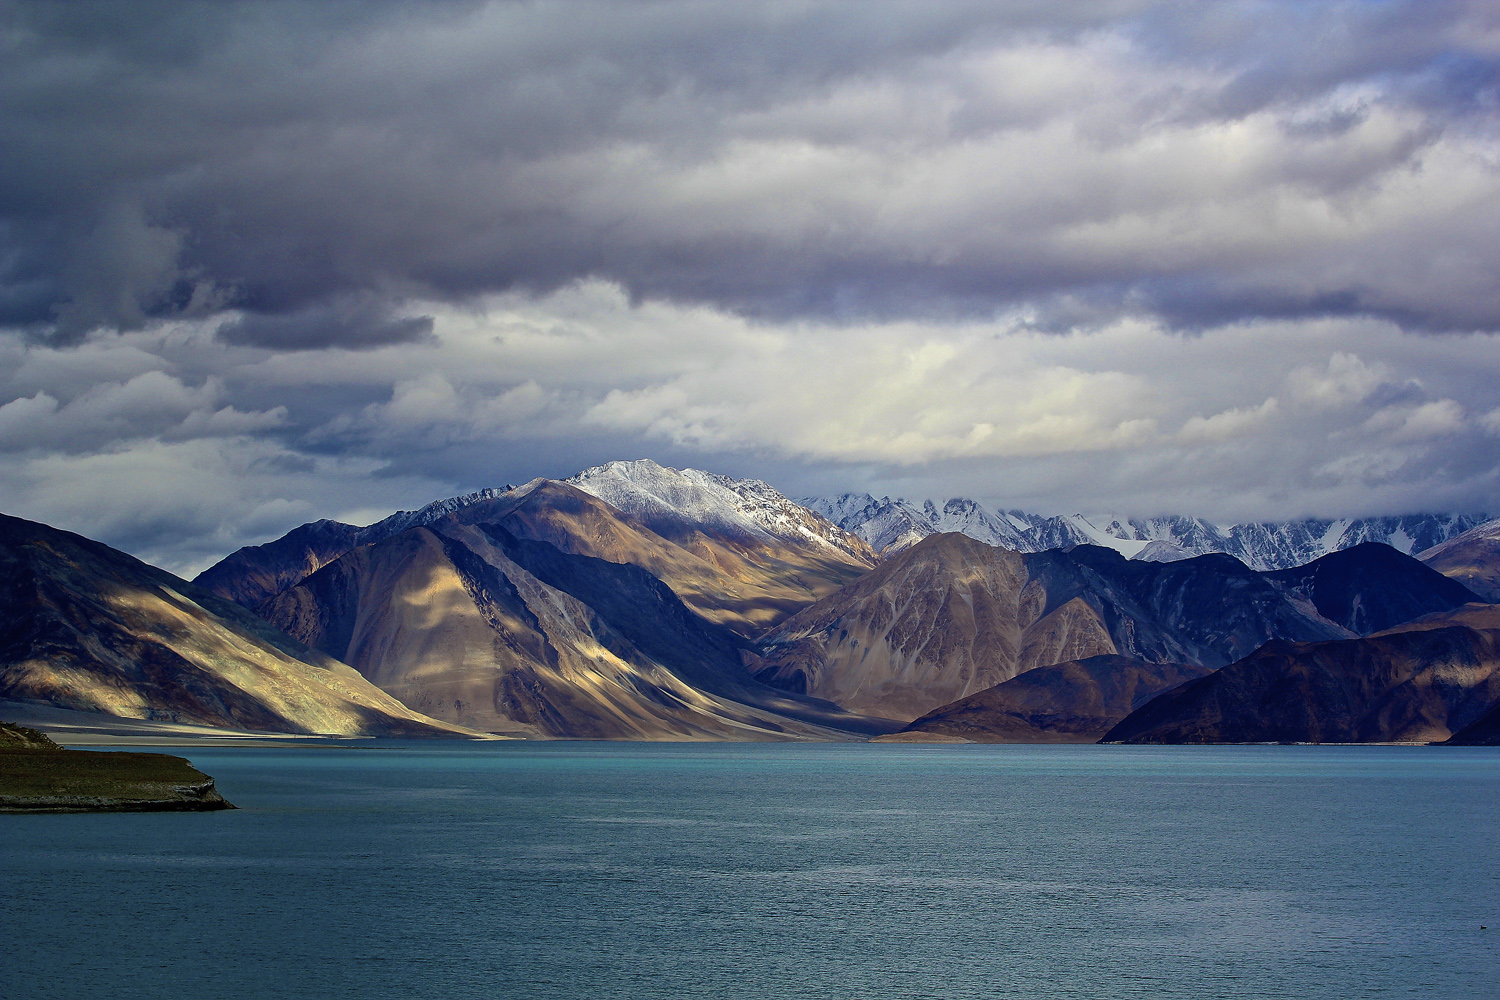 Finally reaching Pangong was such a relief, we didn't care that the weather was hiding the magnificent blue the lake is famous for, we were grateful that the 7 hour bone shaking drive was over. The land seemed barren but inviting, the forms of the mountains where hypnotic as the light fighting through the clouds danced over them.